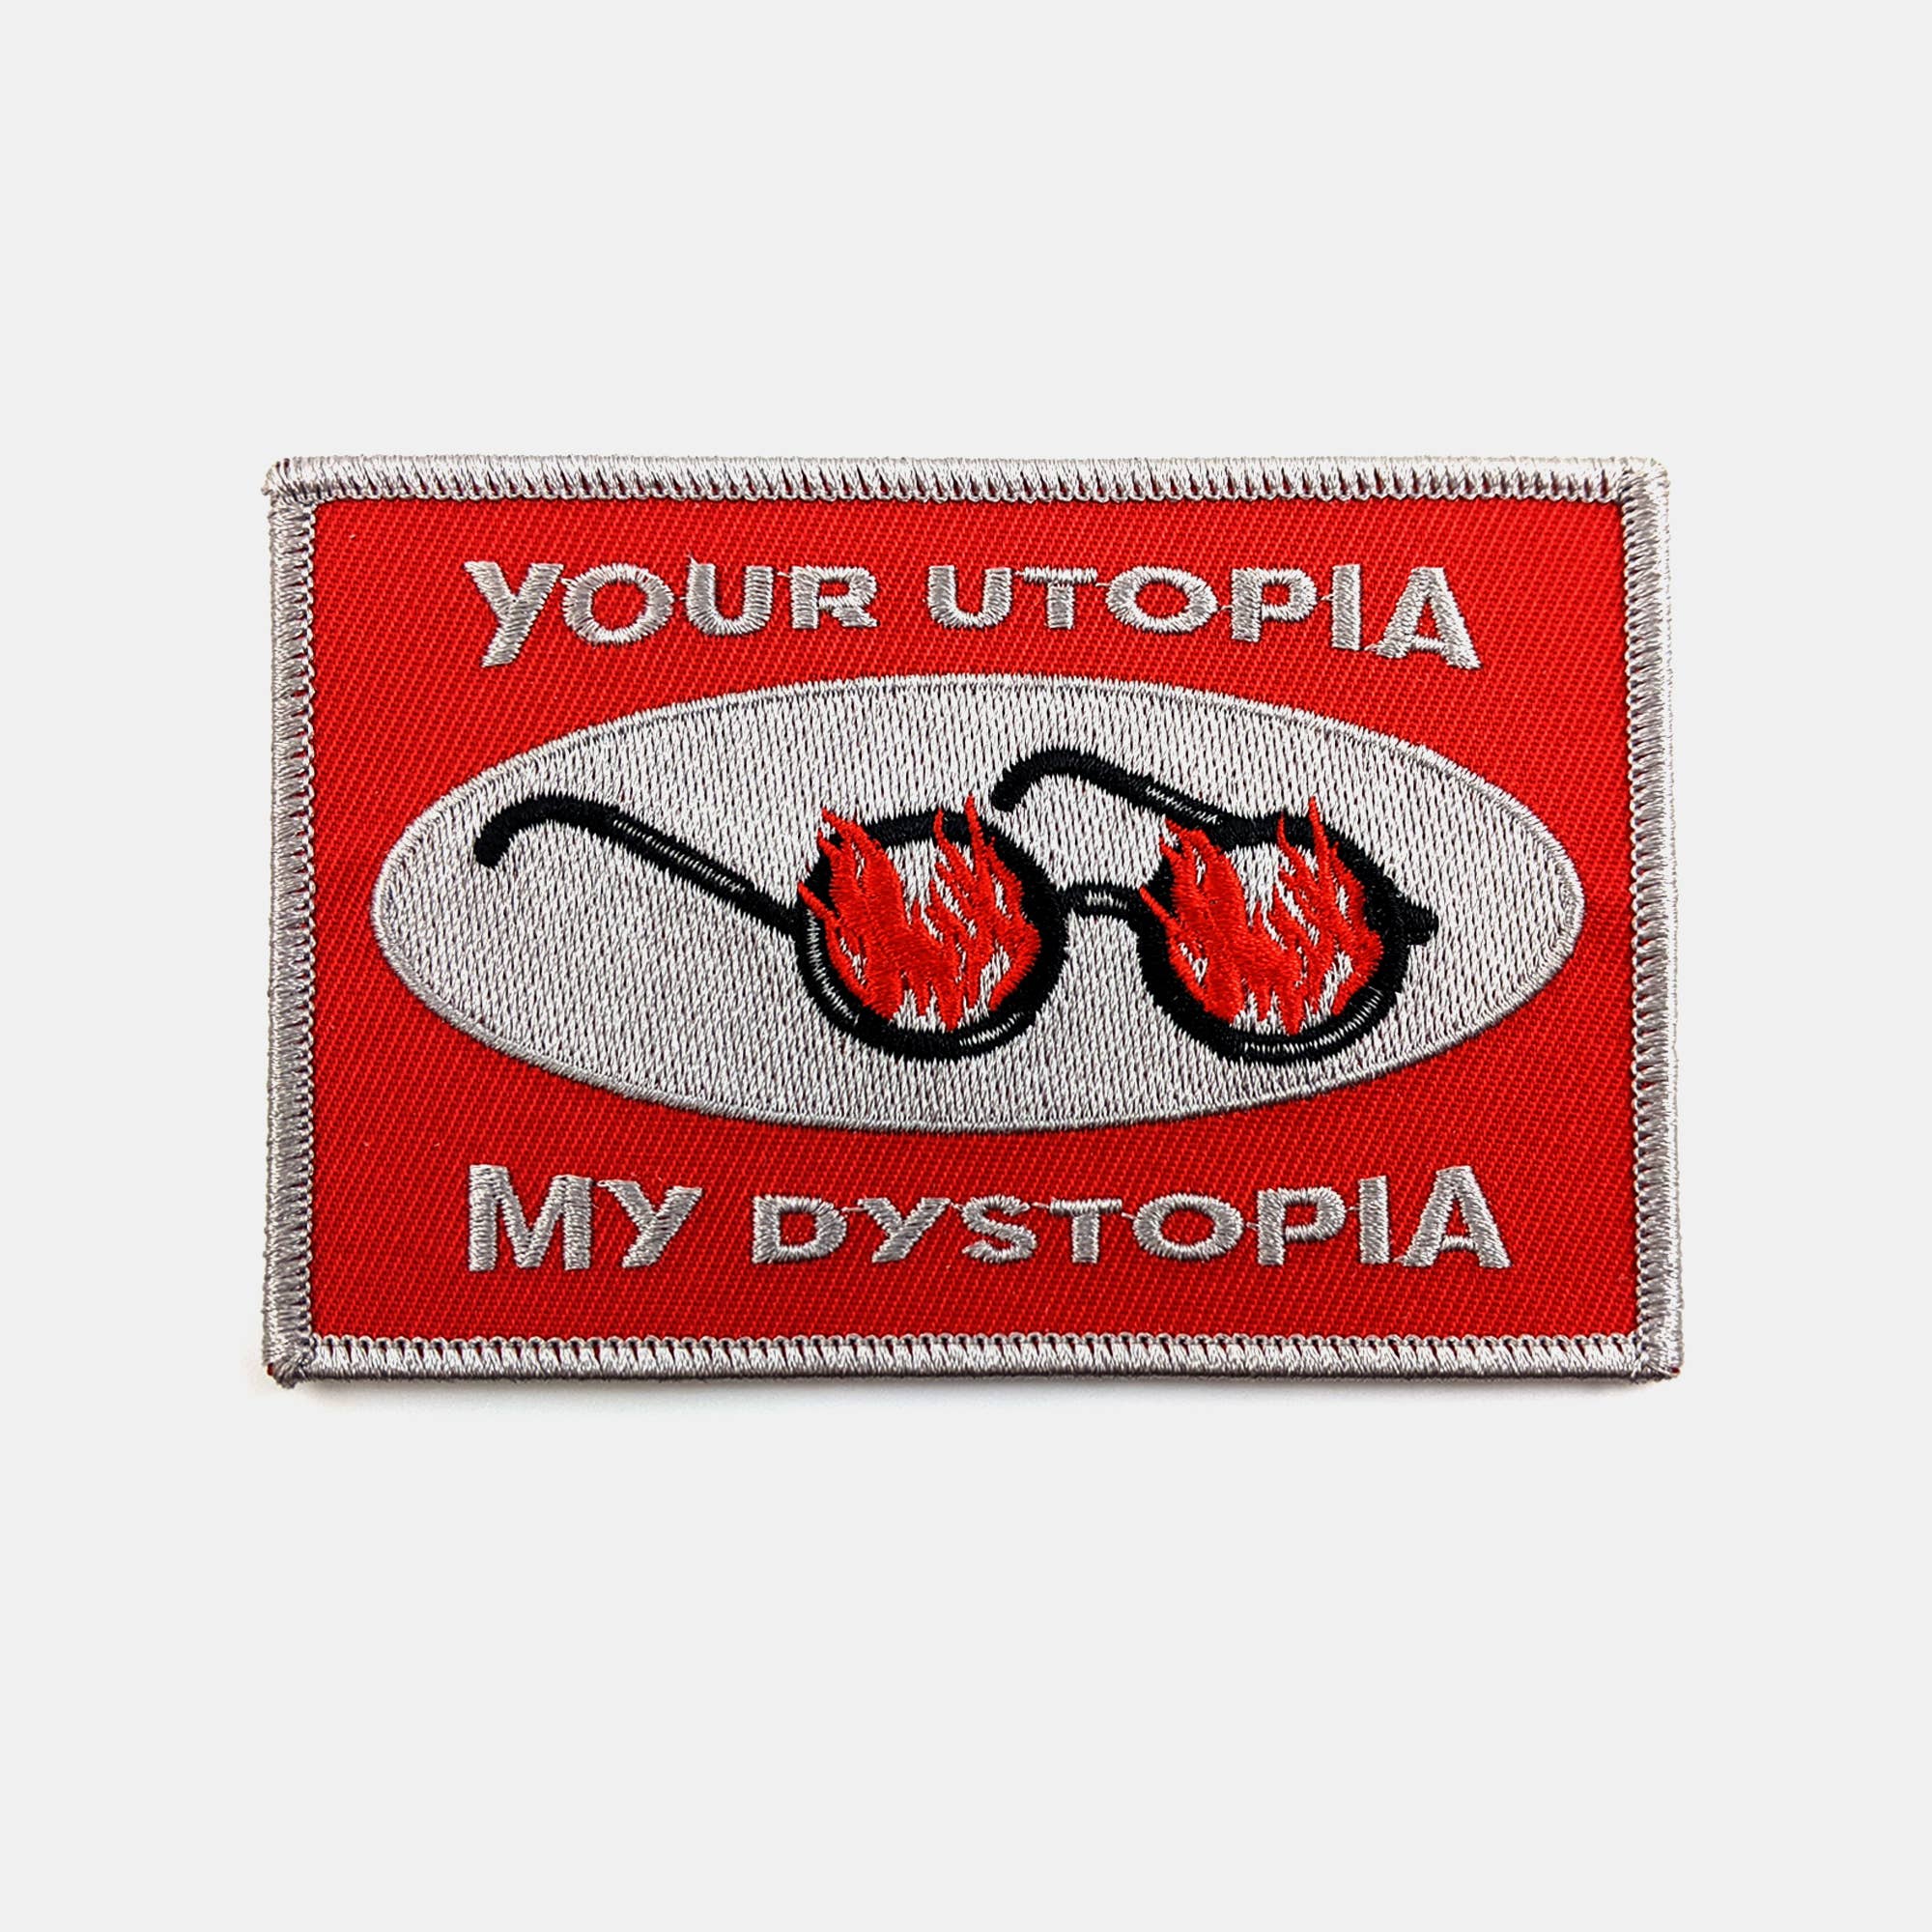 Dystopia Patch